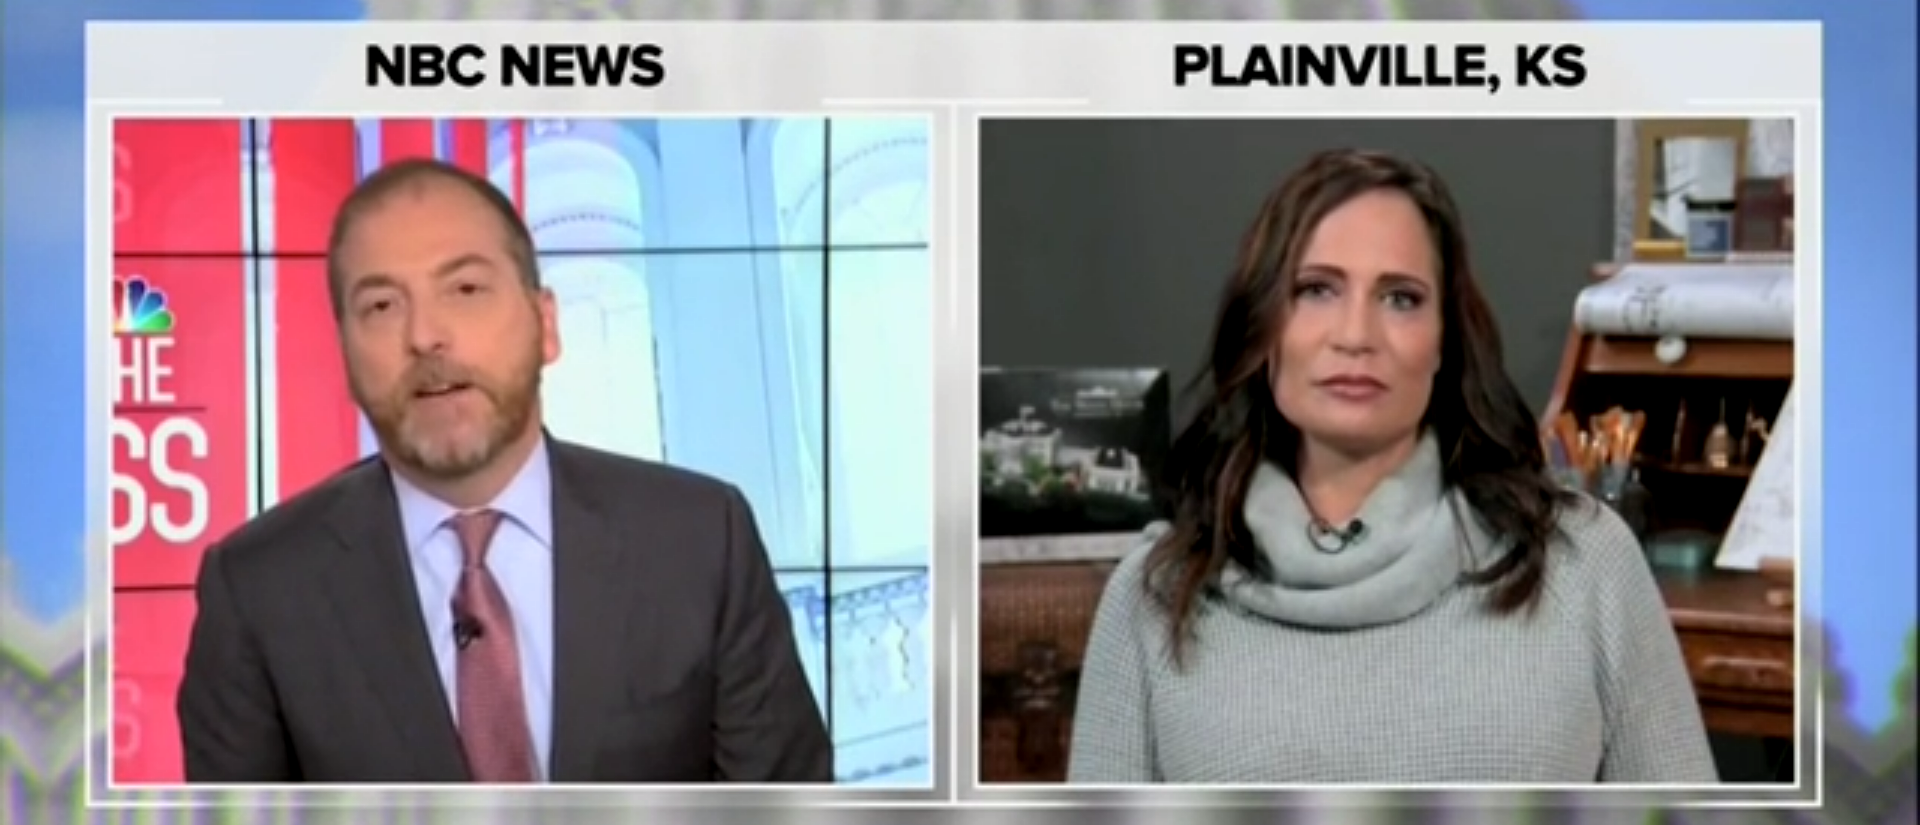 Chuck Todd Asks Stephanie Grisham The Question No One Else Has: ‘Why Should We Believe You?